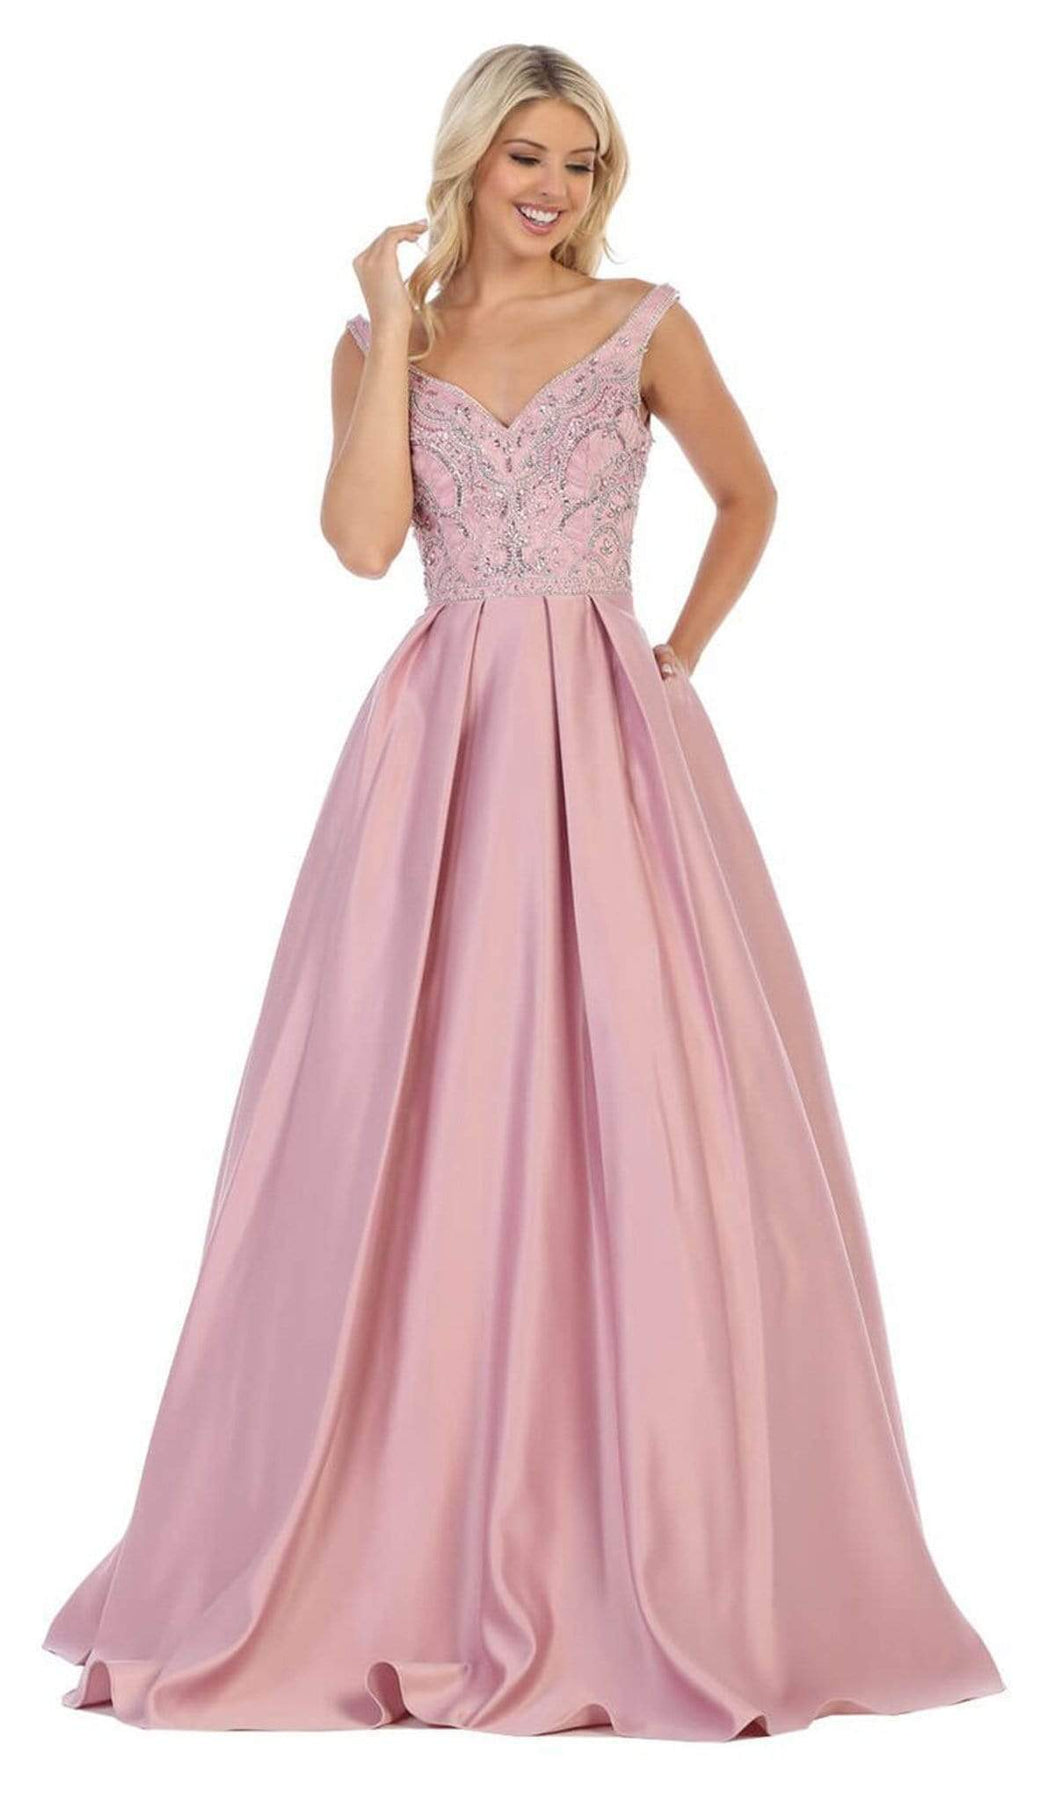 May Queen - MQ1632 Beaded V-Neck Pleated Ballgown Bridesmaid Dresses 4 / Mauve